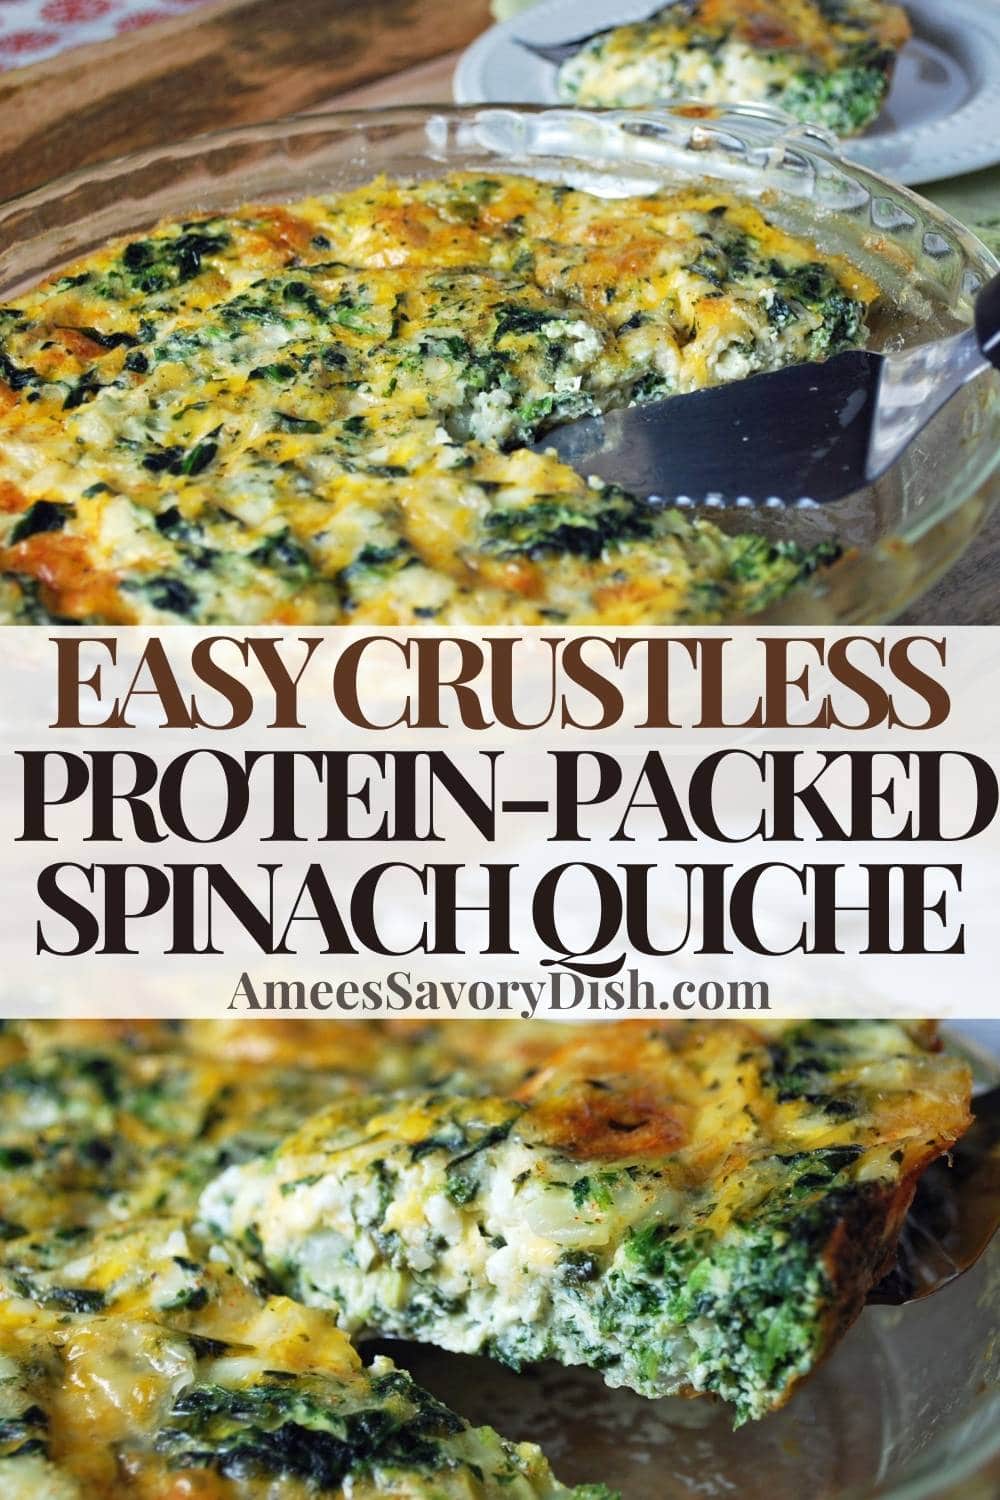 This low-carb cottage cheese crustless quiche is a delicious meal that's high in protein, packed with veggies, and full of flavor. via @Ameessavorydish